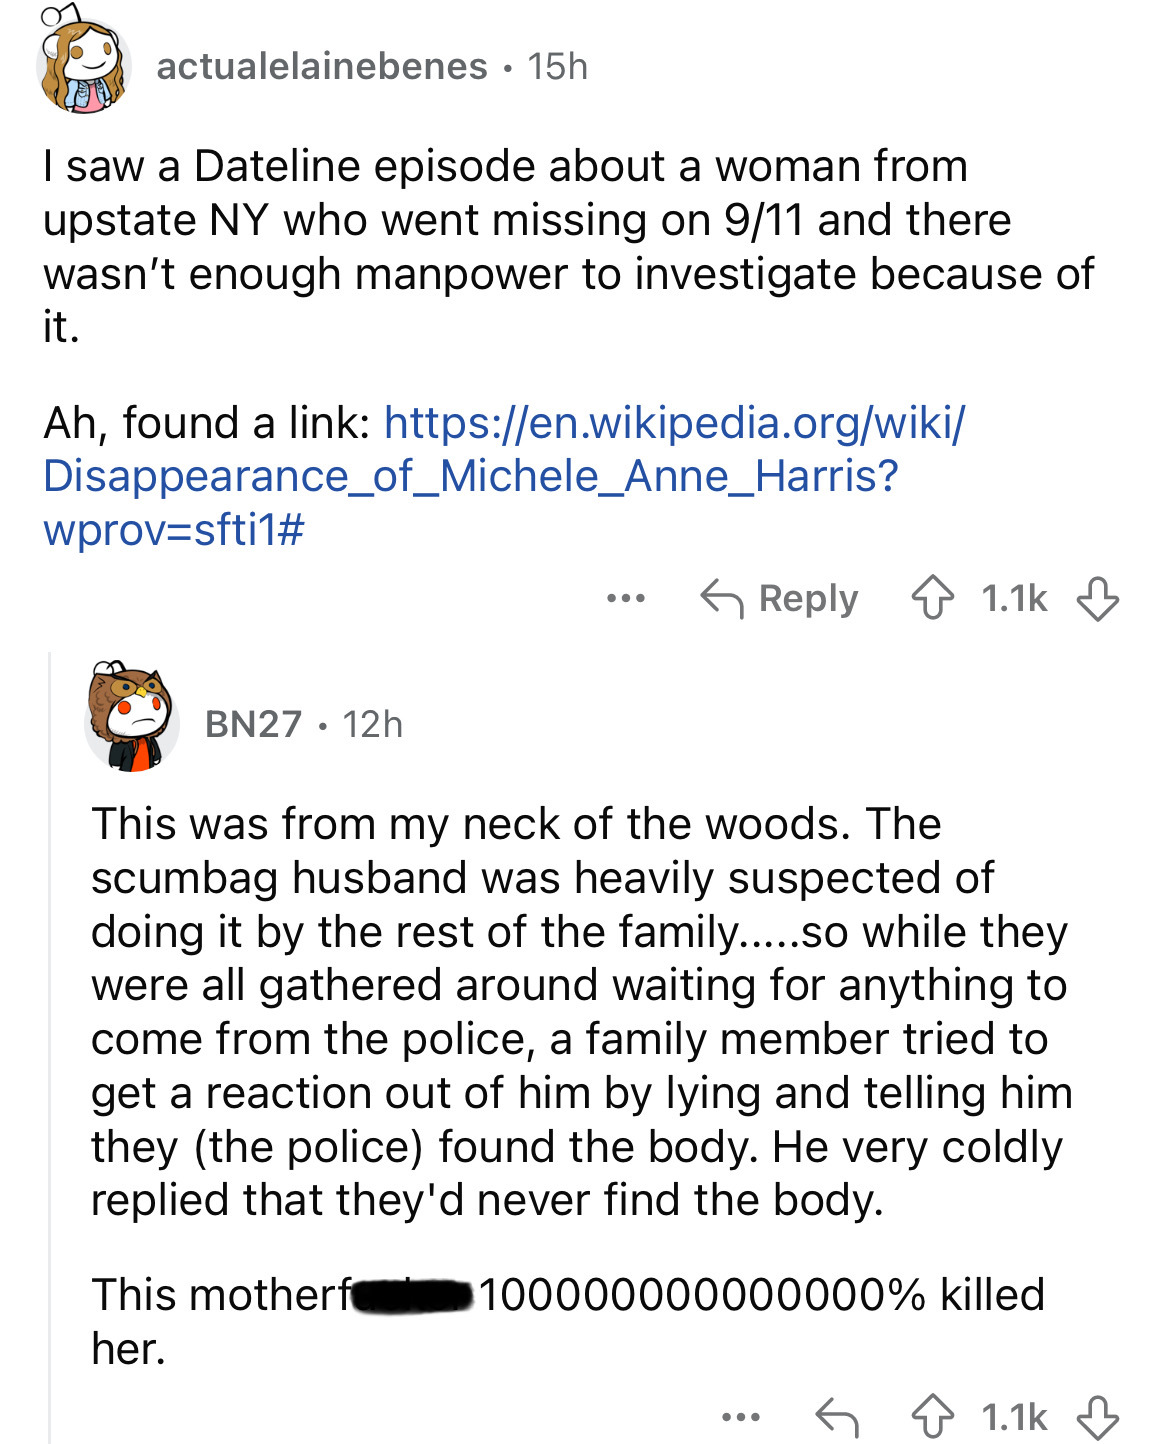 screenshot - actualelainebenes 15h I saw a Dateline episode about a woman from upstate Ny who went missing on 911 and there wasn't enough manpower to investigate because of it. Ah, found a link Disappearance_of_Michele_Anne_Harris? wprovsfti1# ... BN27.12